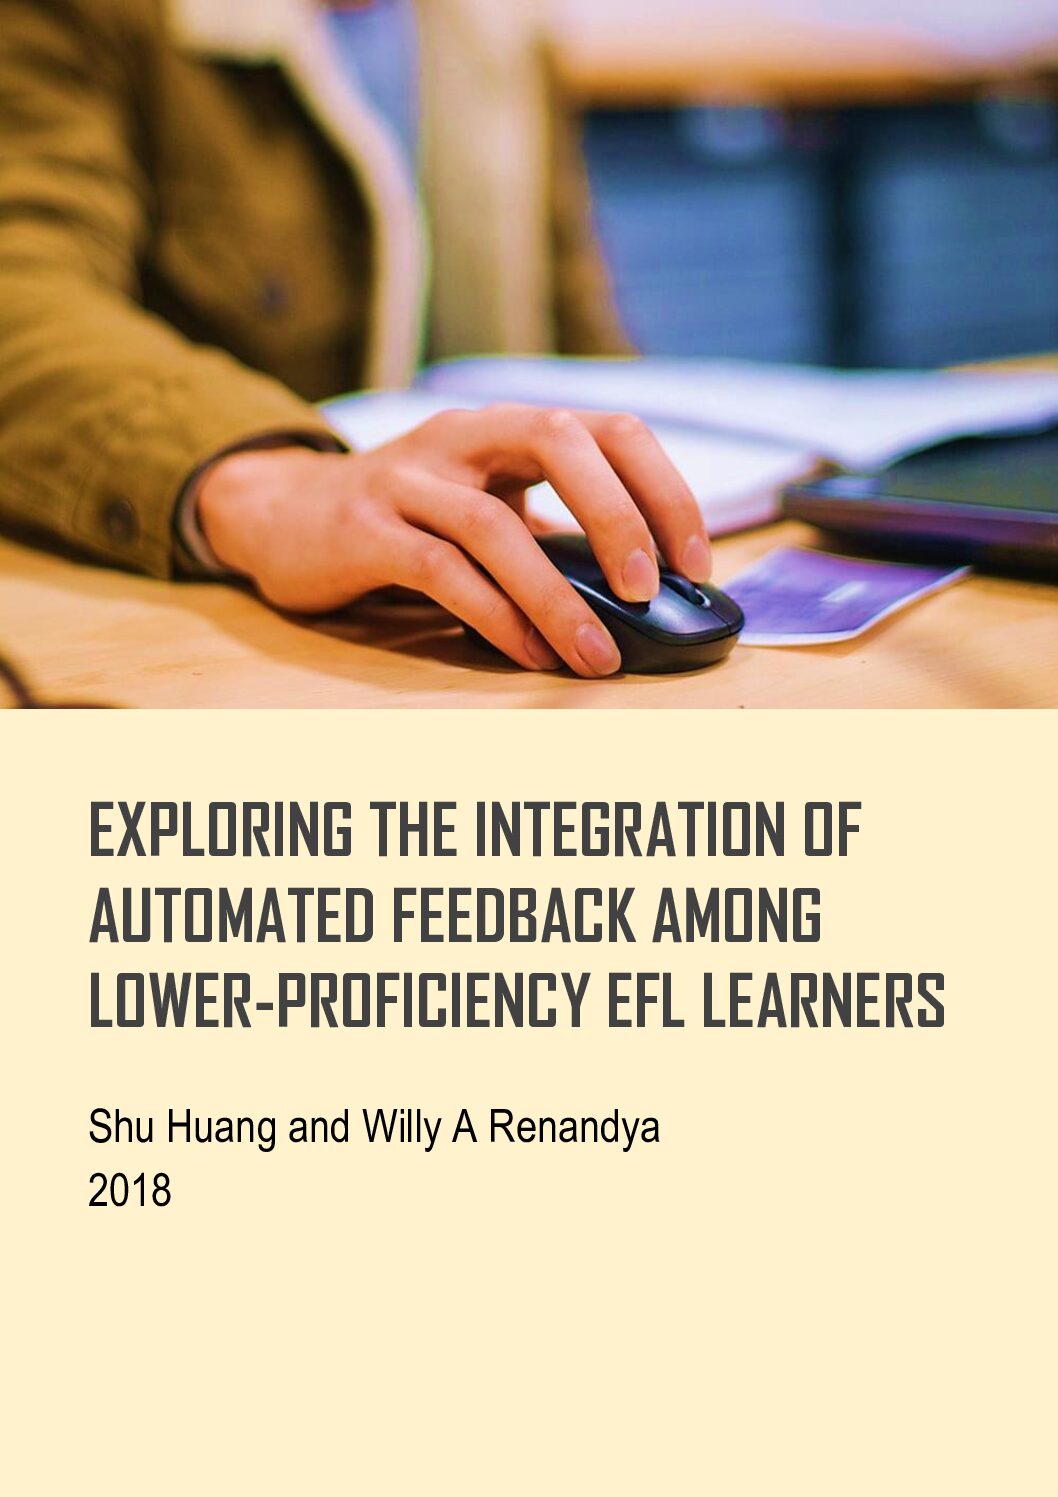 Exploring the integration of automated feedback among lower-proficiency EFL learners